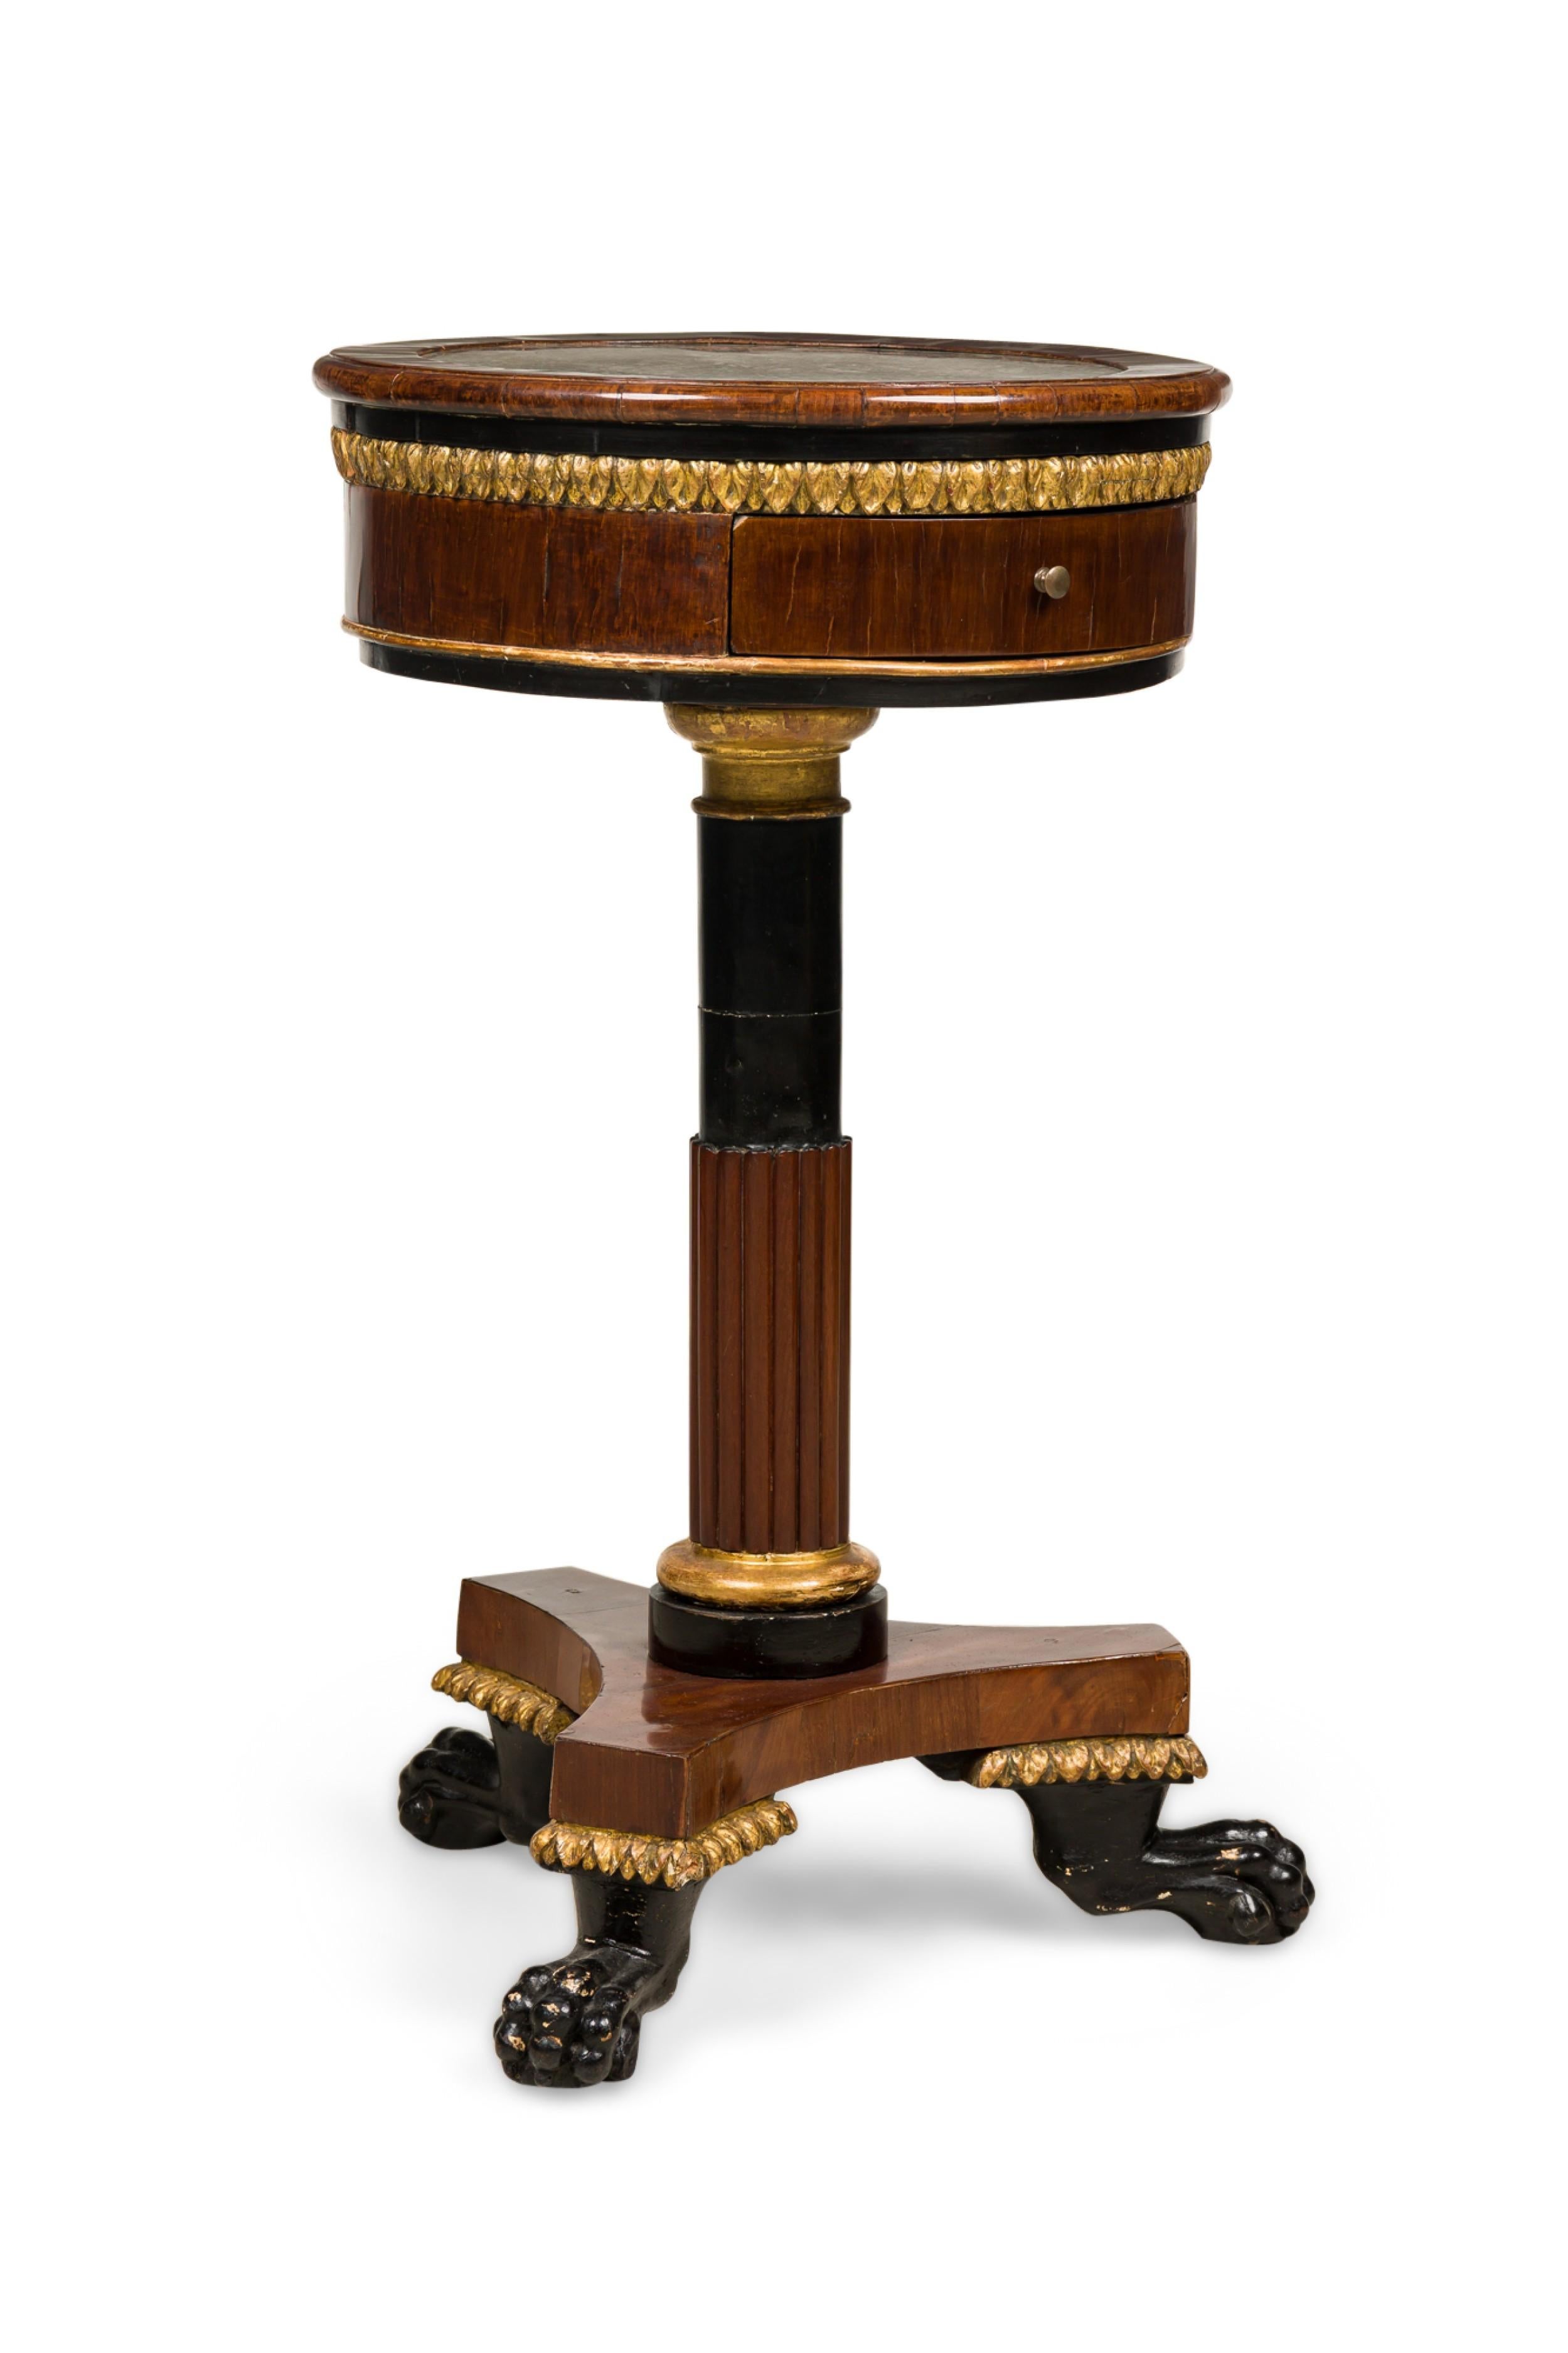 PAIR of Italian Neo-classic (18/19th Century) mahagany and gilt trim gueridon end tables having a round inset marble top over a small draw resting on a narrow pedestal ending on a base with three ebonized claw feet (PRICED AS PAIR)
